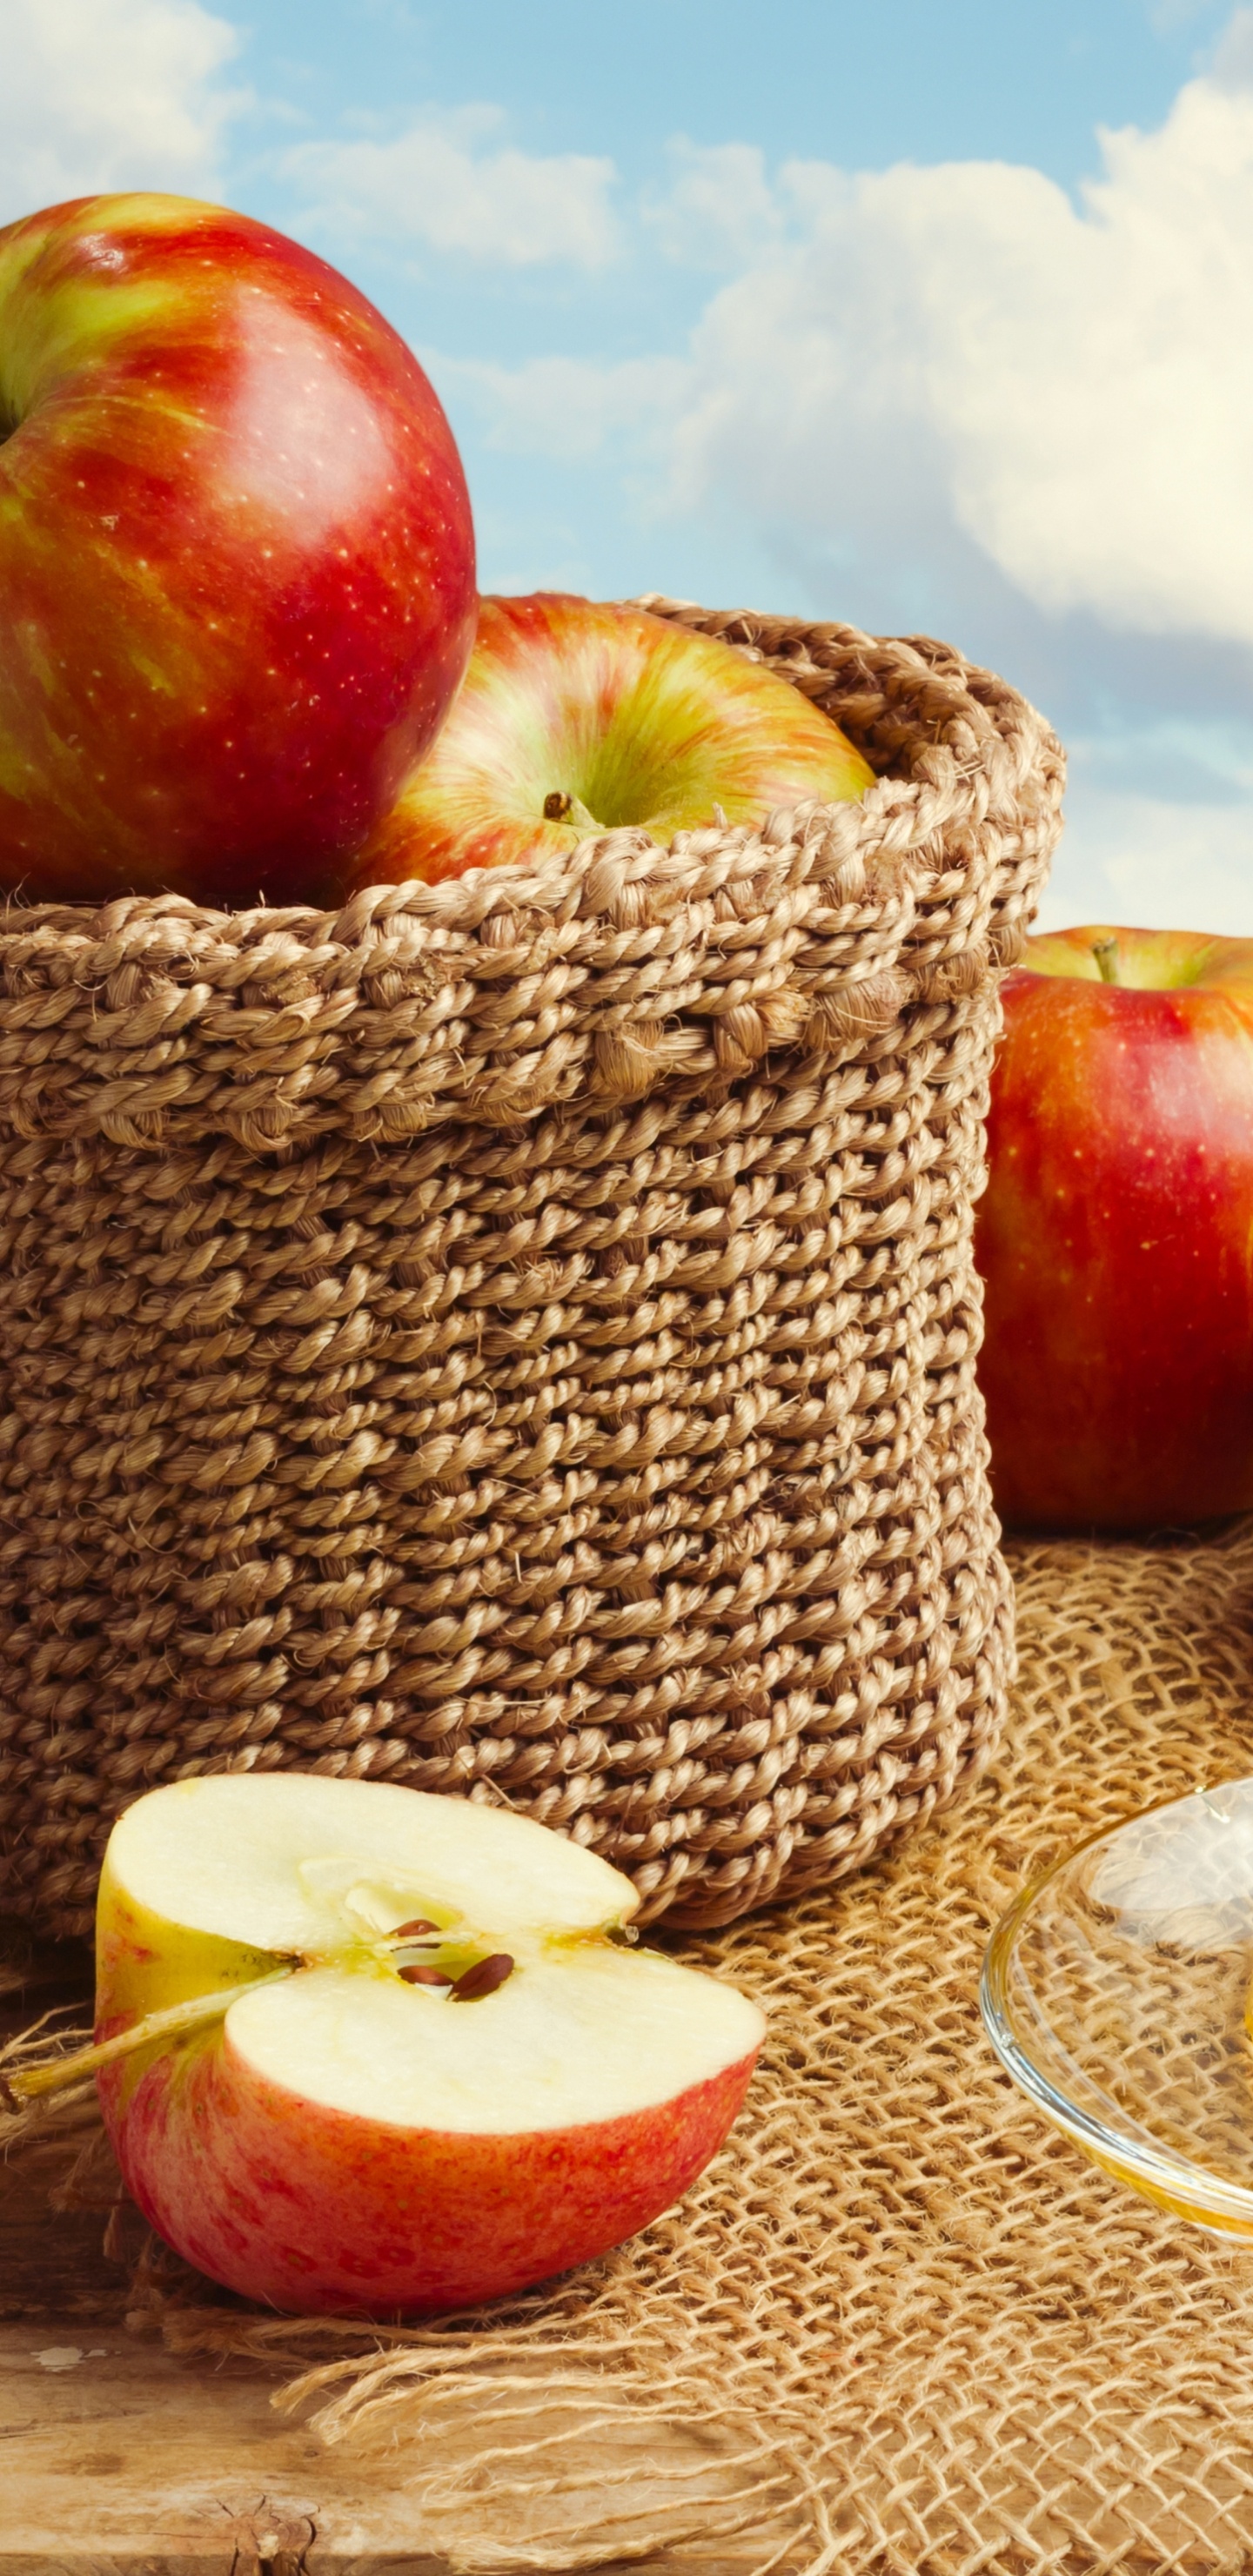 Red Apples on Brown Woven Basket. Wallpaper in 1440x2960 Resolution